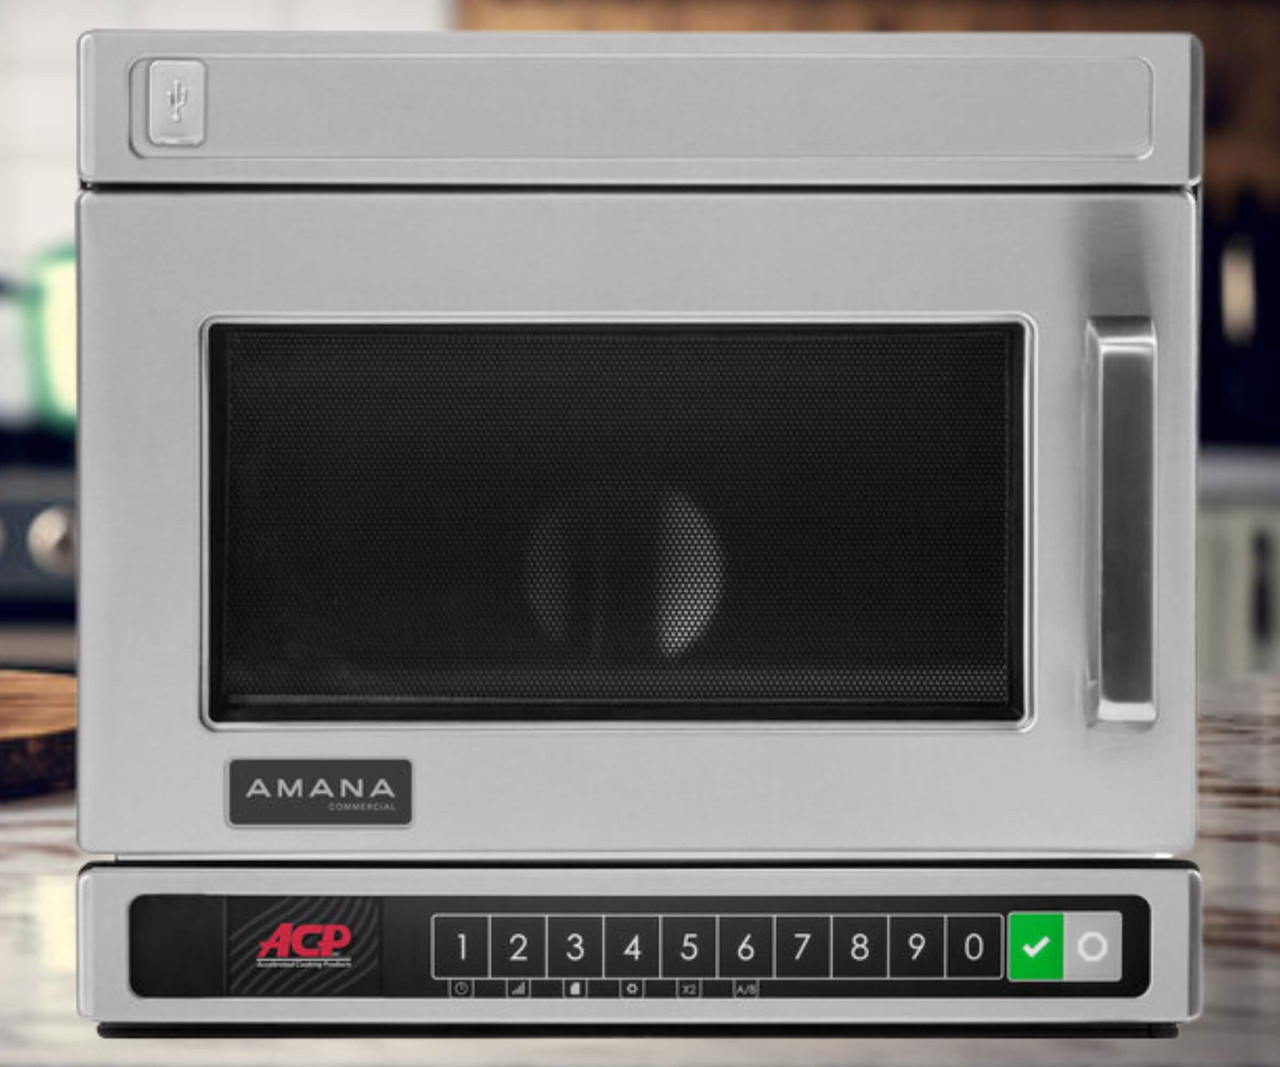 Amana Heavy-Duty Stainless Steel Compact Commercial Microwave - 120V, 1000W | Powerful Performance in a Compact Design